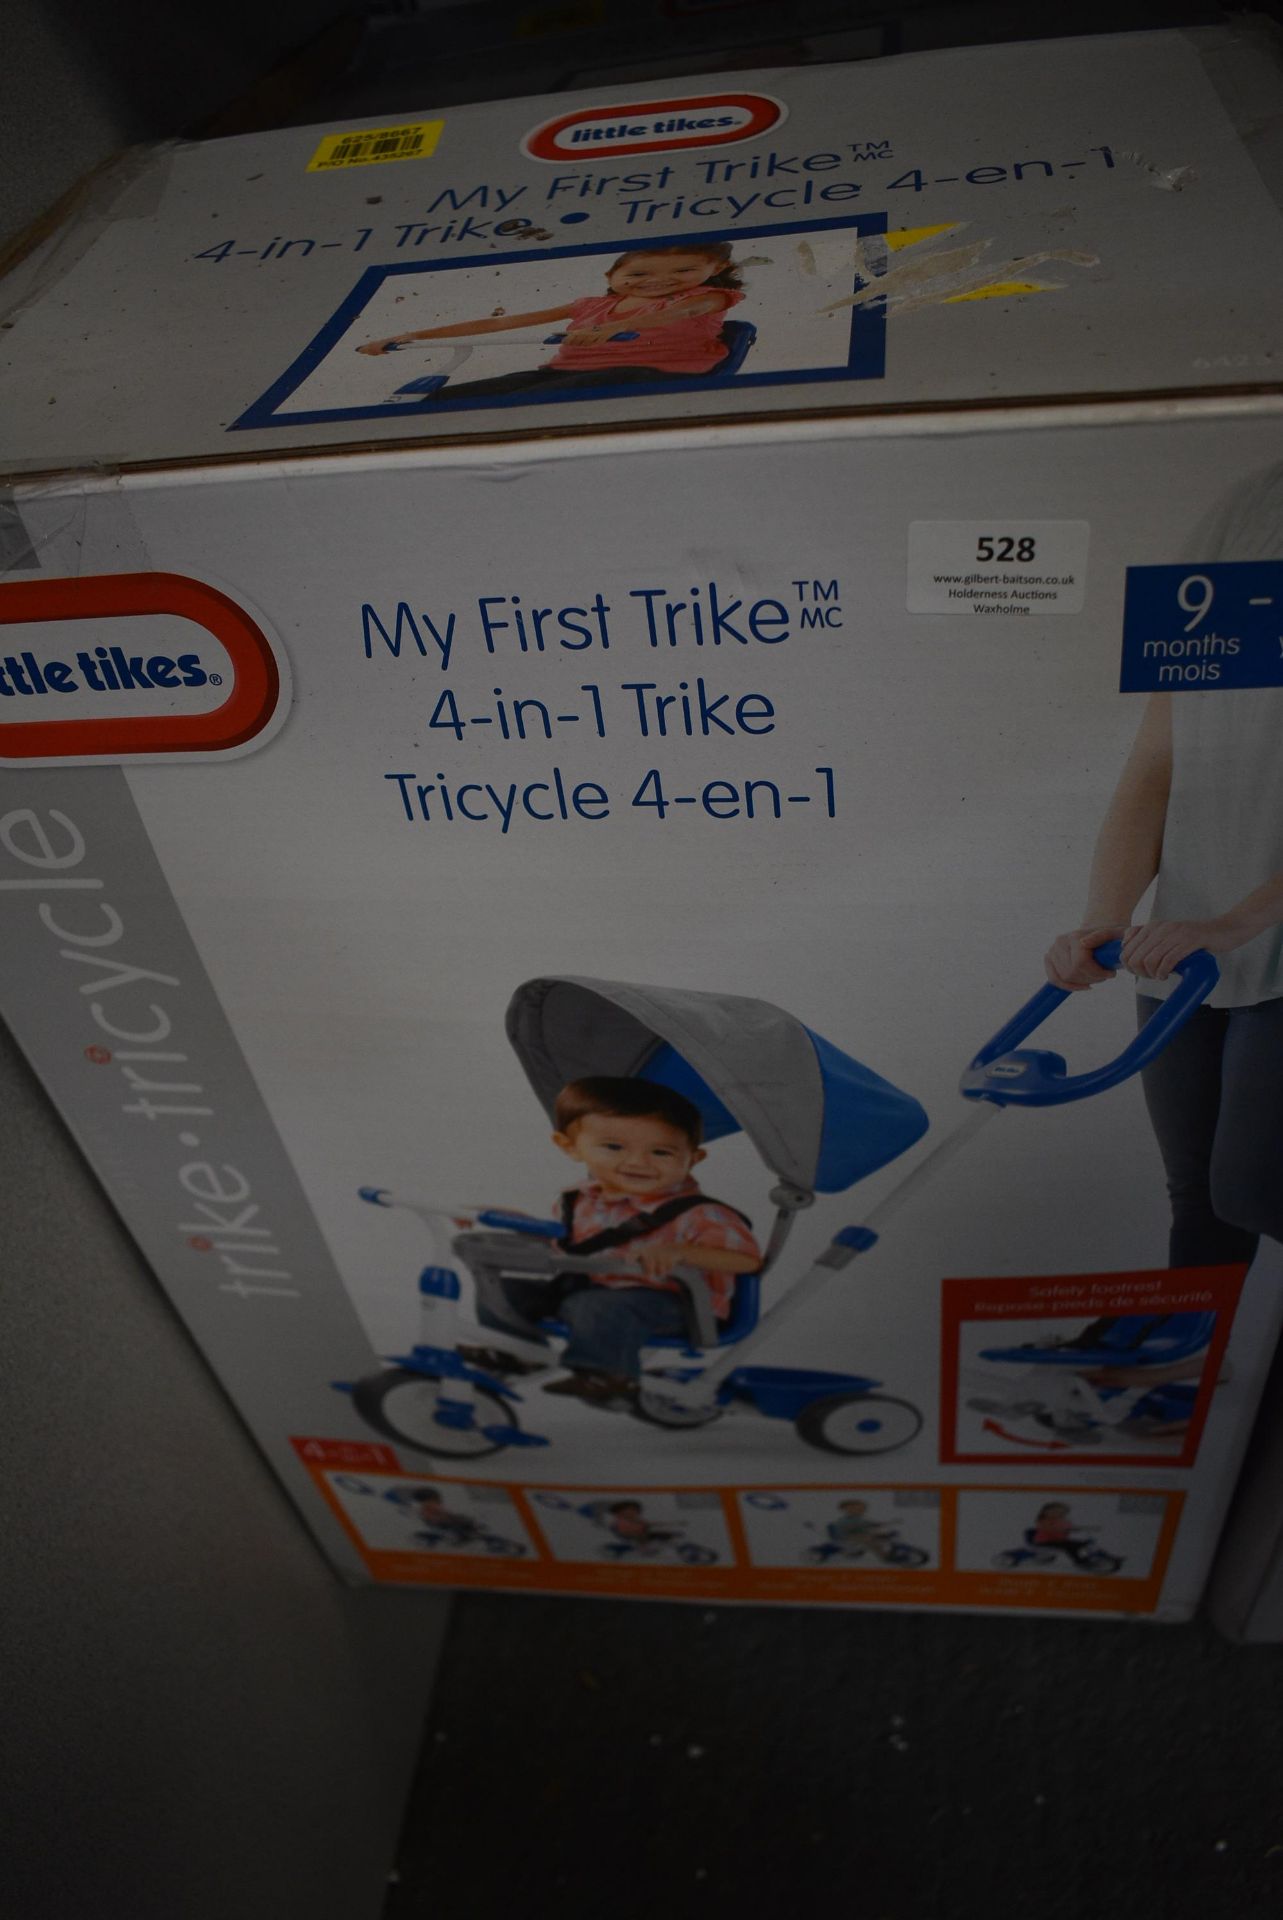 Little Tikes 4-in-1 Tricycle 9m – 5y (blue & grey) - Image 2 of 2